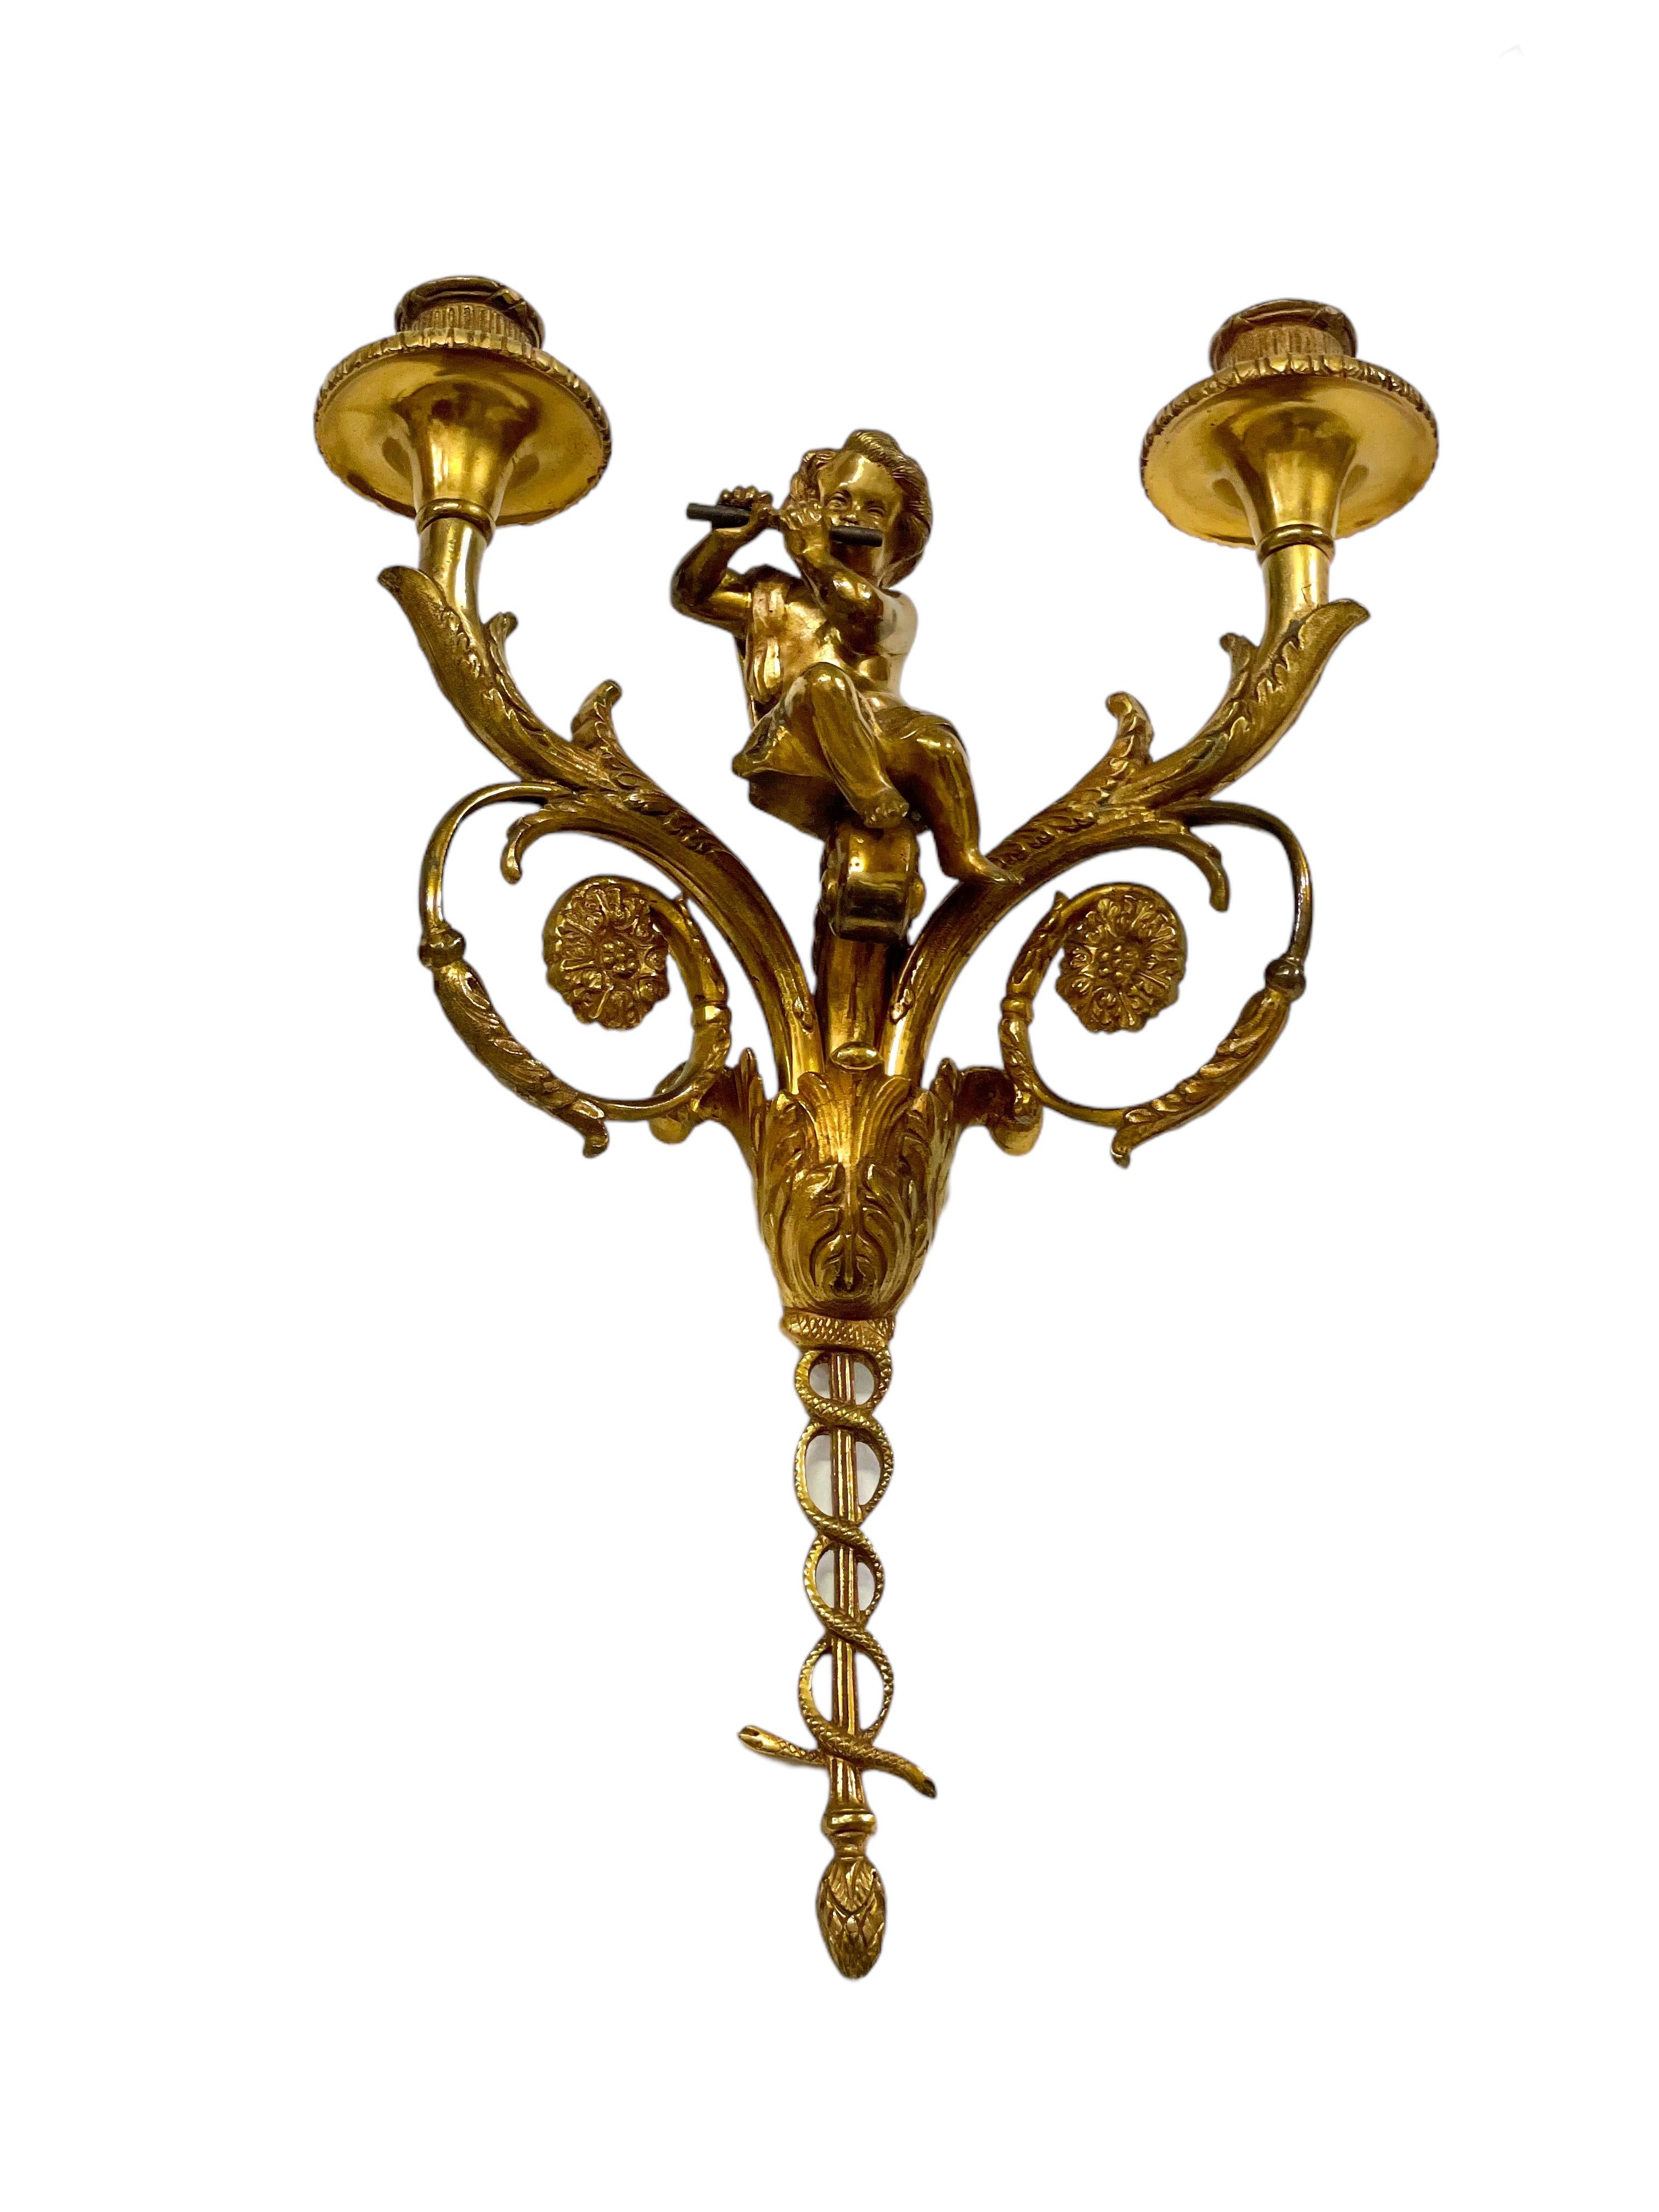 20th Century Attributed to Maison Charles Pair of Tall Gilt Bronze Wall Sconces  For Sale